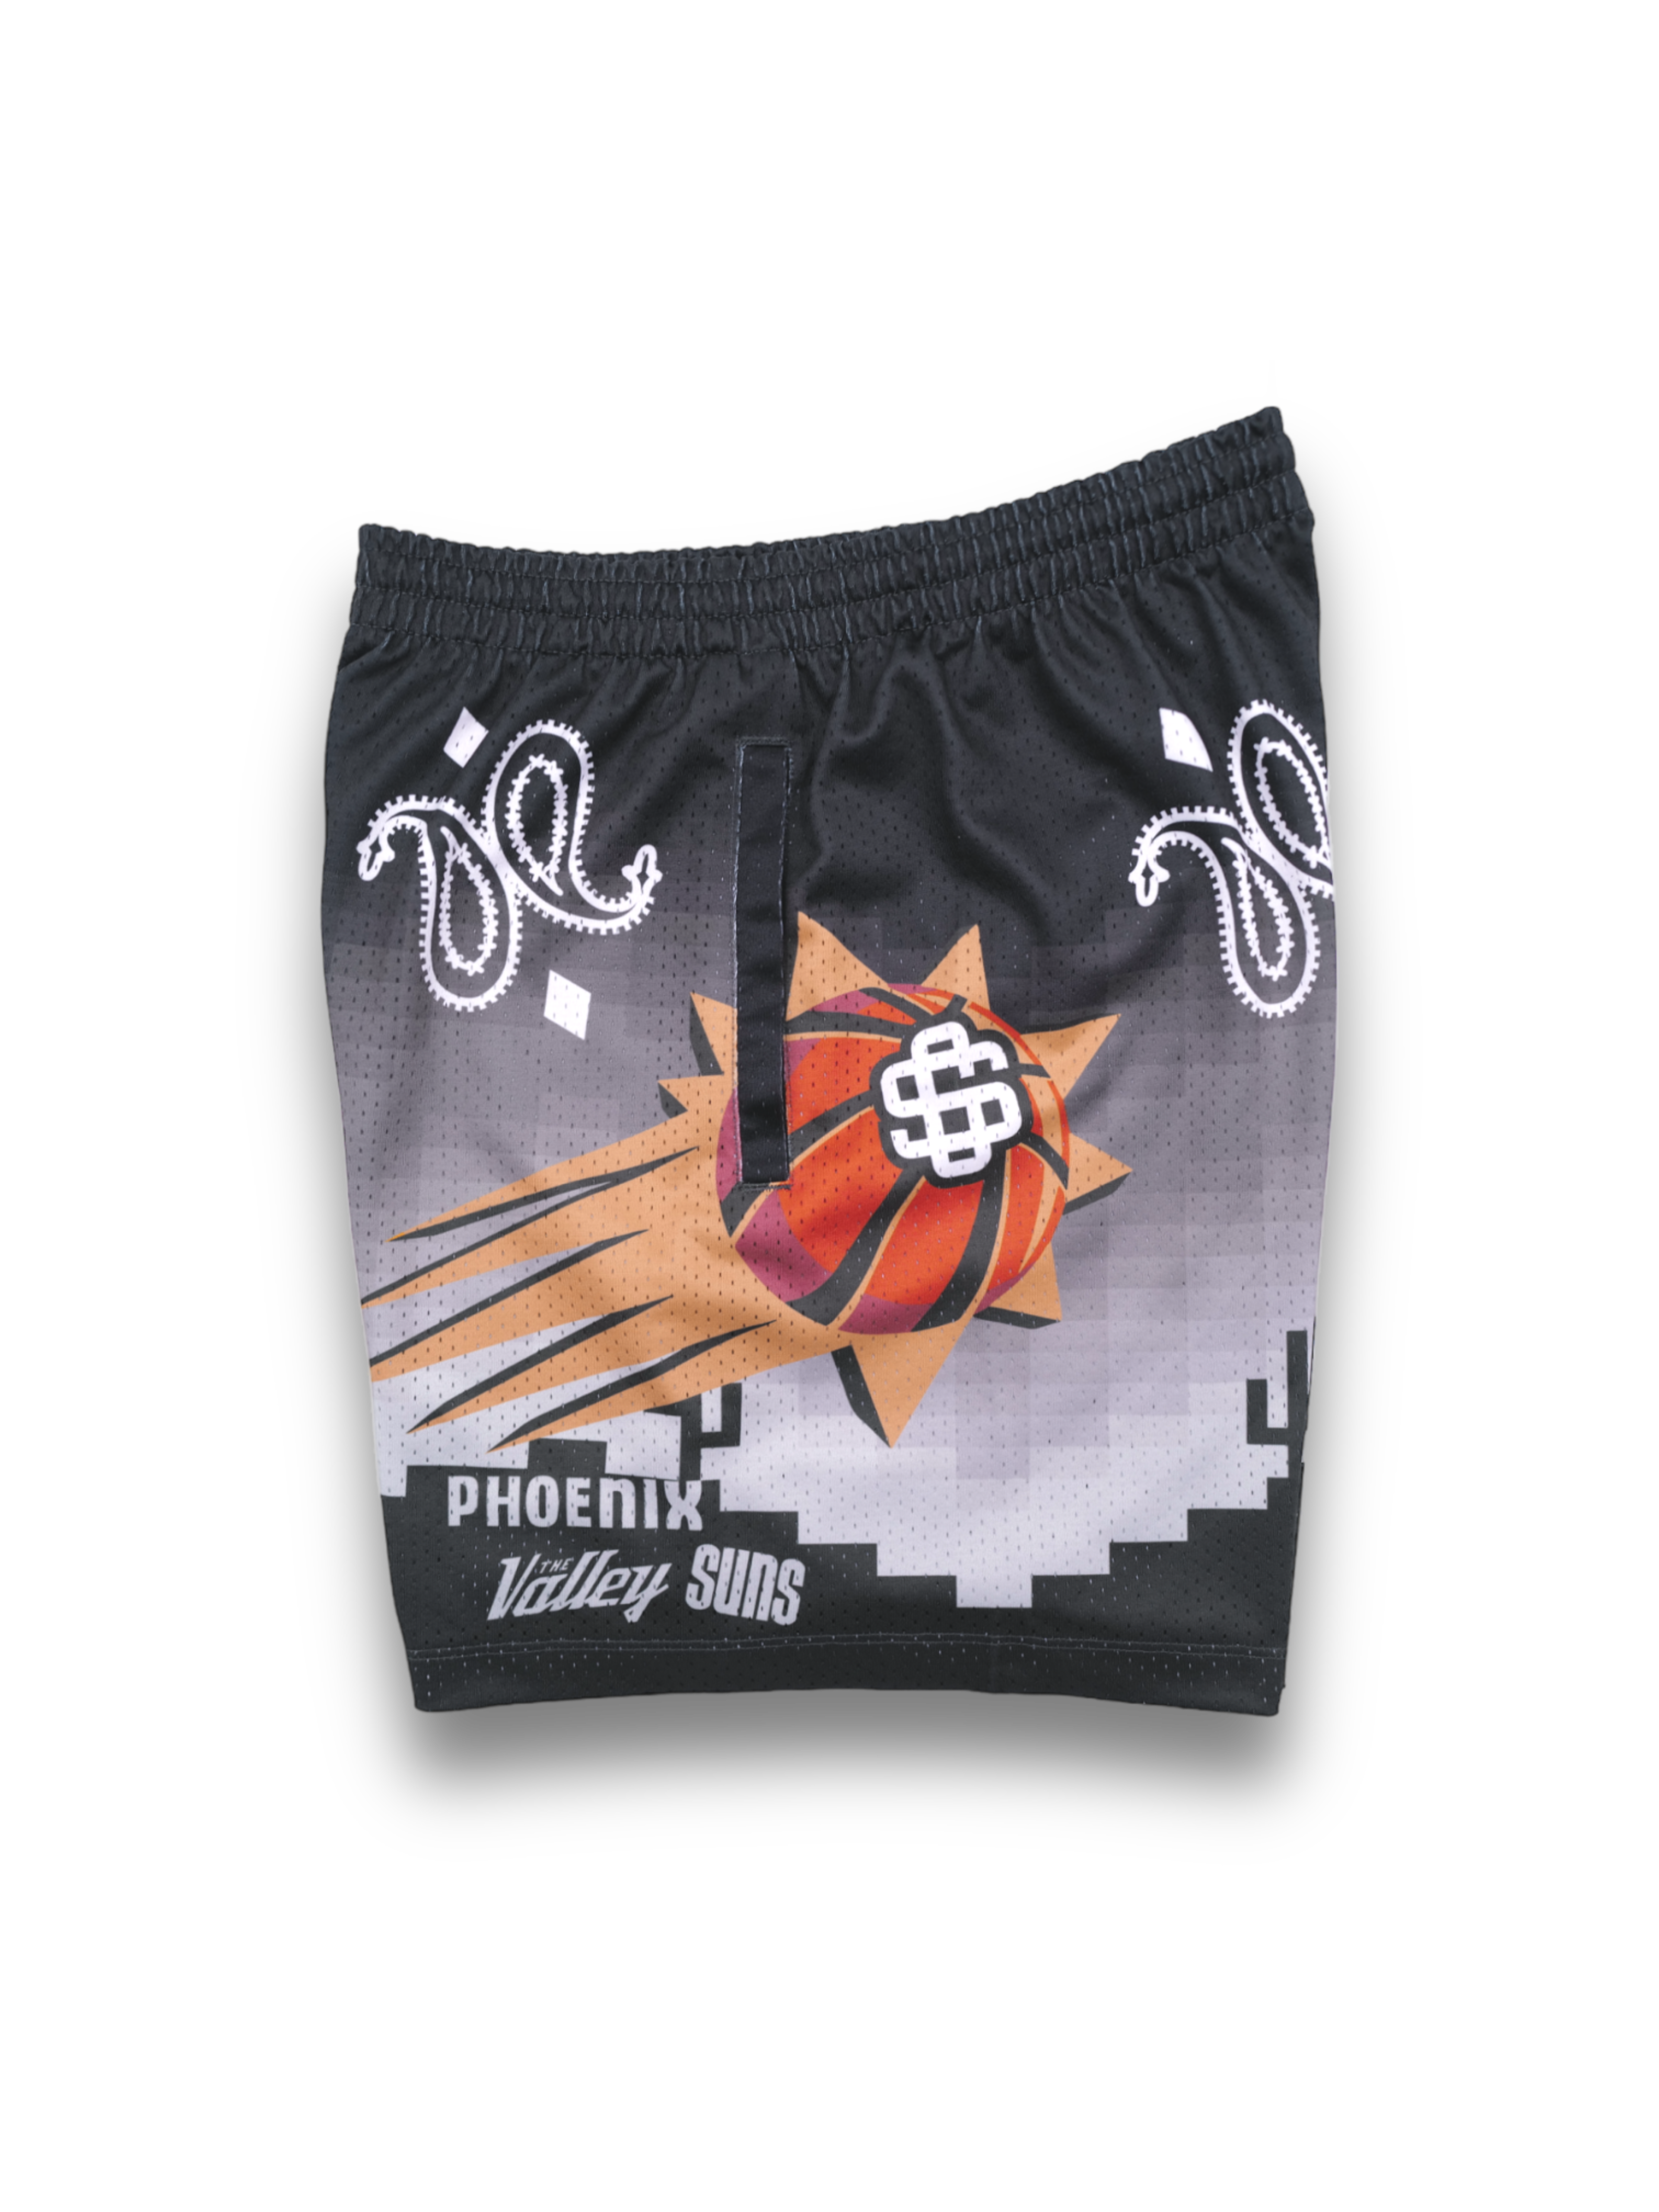 Alternate View 2 of Suns shorts